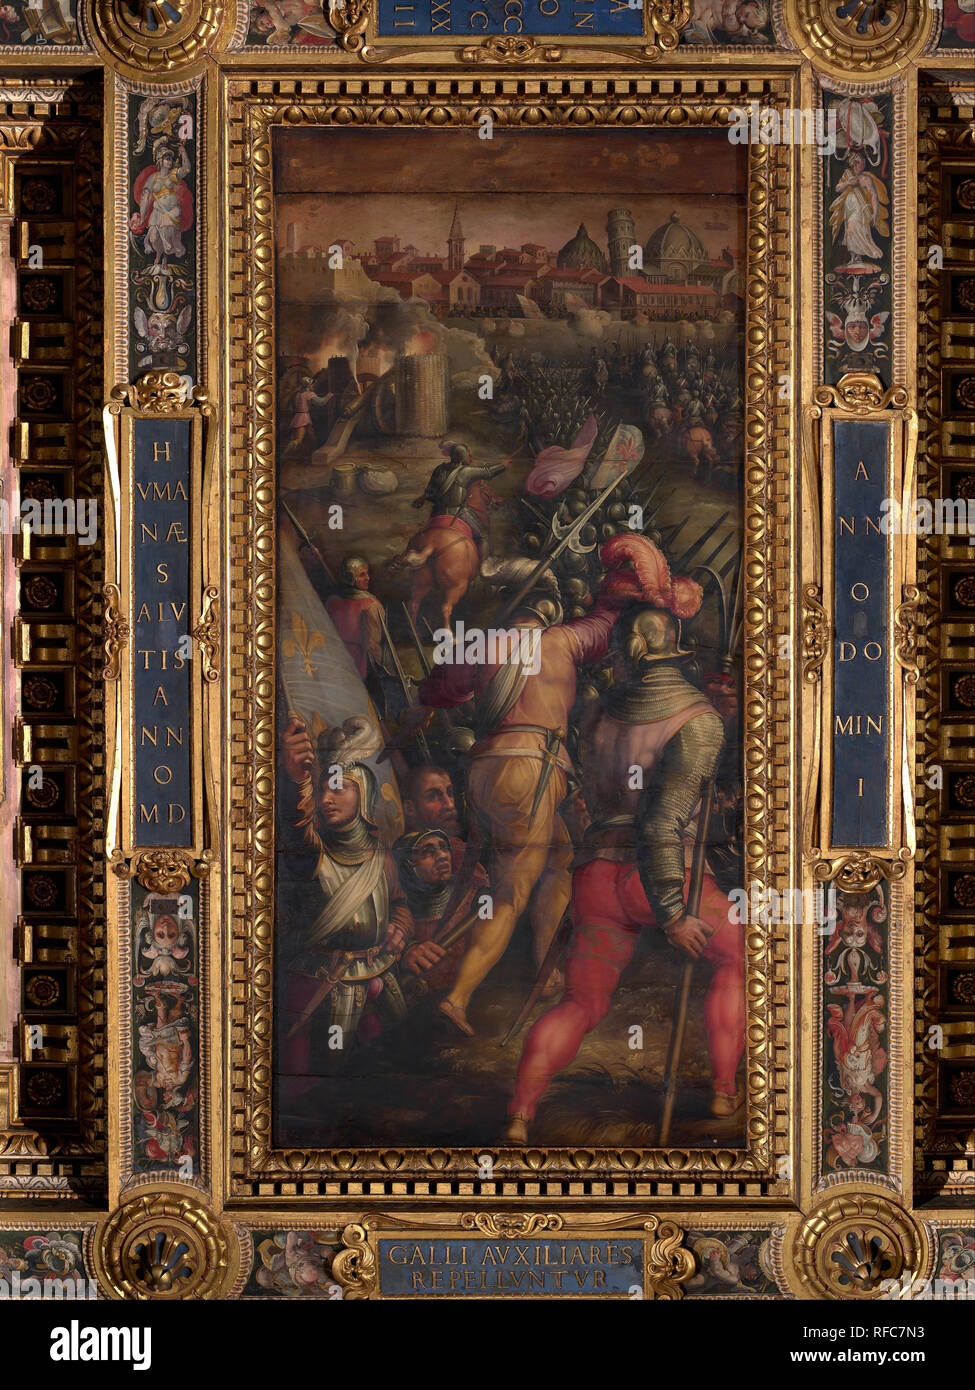 Battle of Barbagianni, nearby Pisa. Date/Period: 1563 - 1565. Oil painting on wood. Height: 540 mm (21.25 in); Width: 250 mm (9.84 in). Author: Giorgio Vasari. VASARI, GIORGIO. Stock Photo